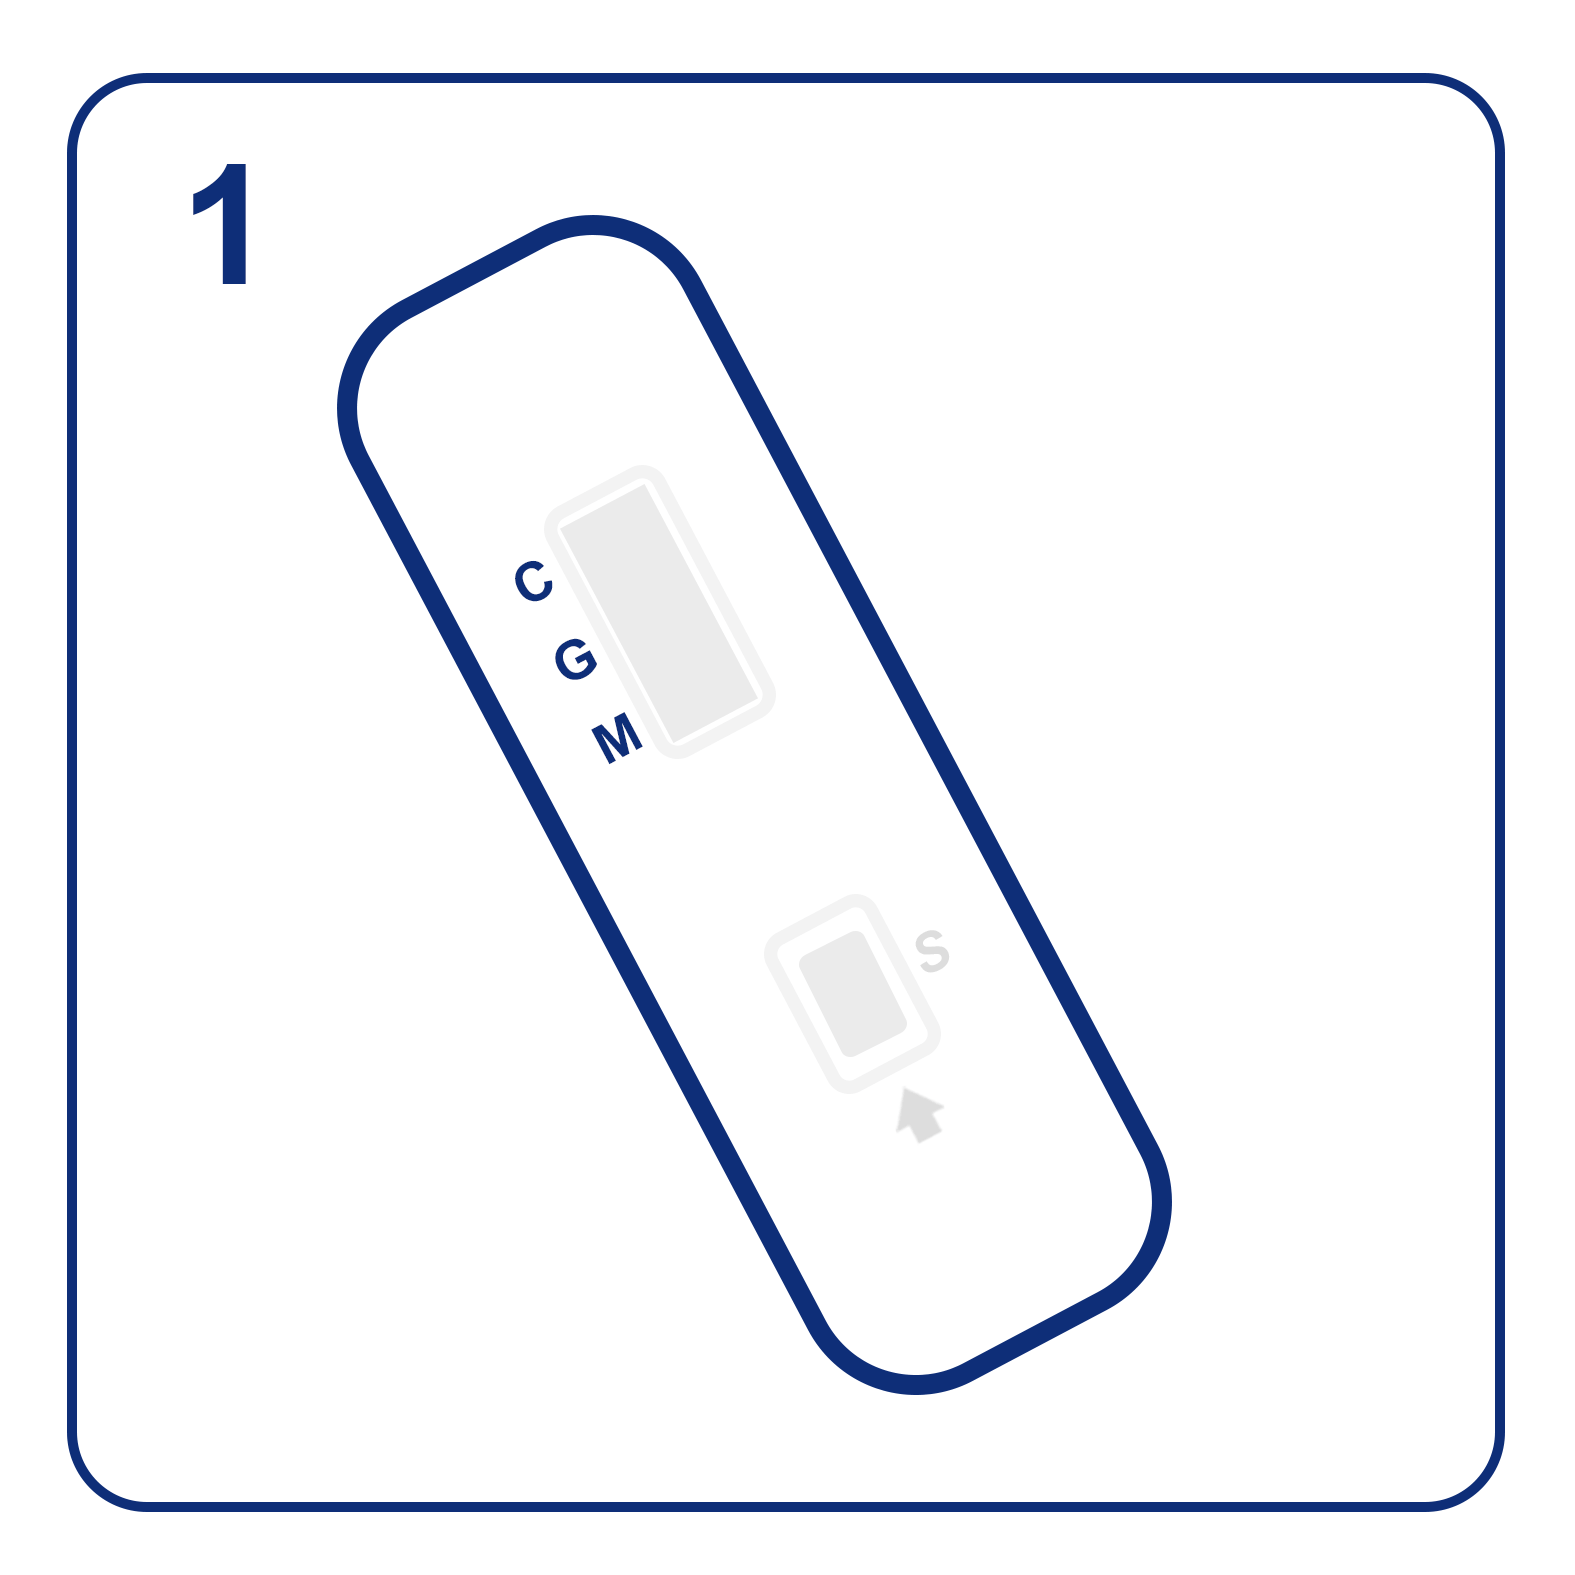 Place the cassette on a level surface at room temperature (15-25°C, 59-77°F)